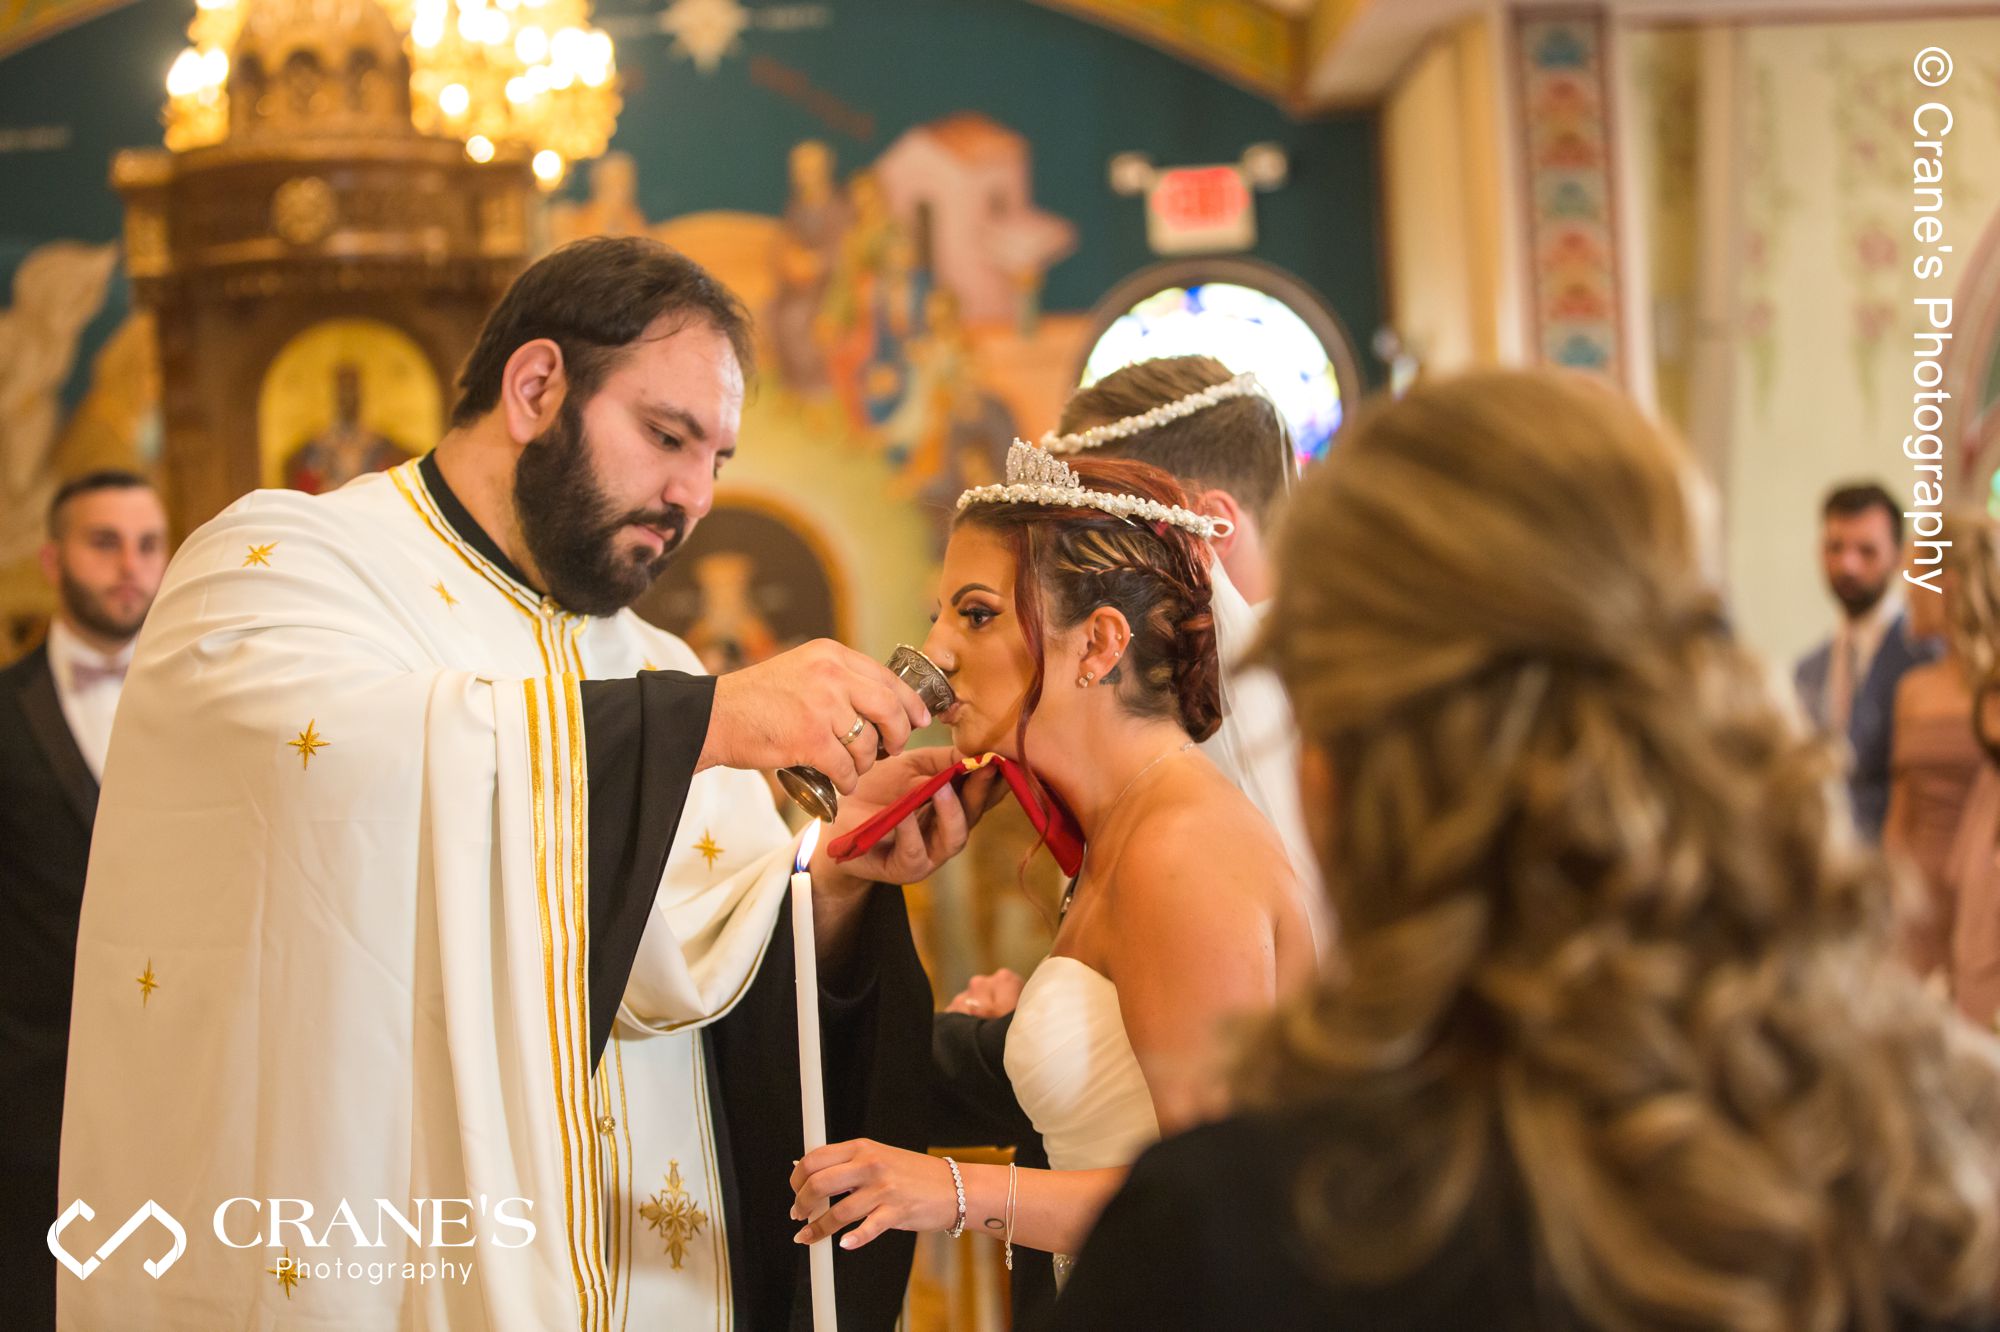 Greek bride sip from the common cup during an orthodox wedding ceremony at St. Nectarios in Palatine